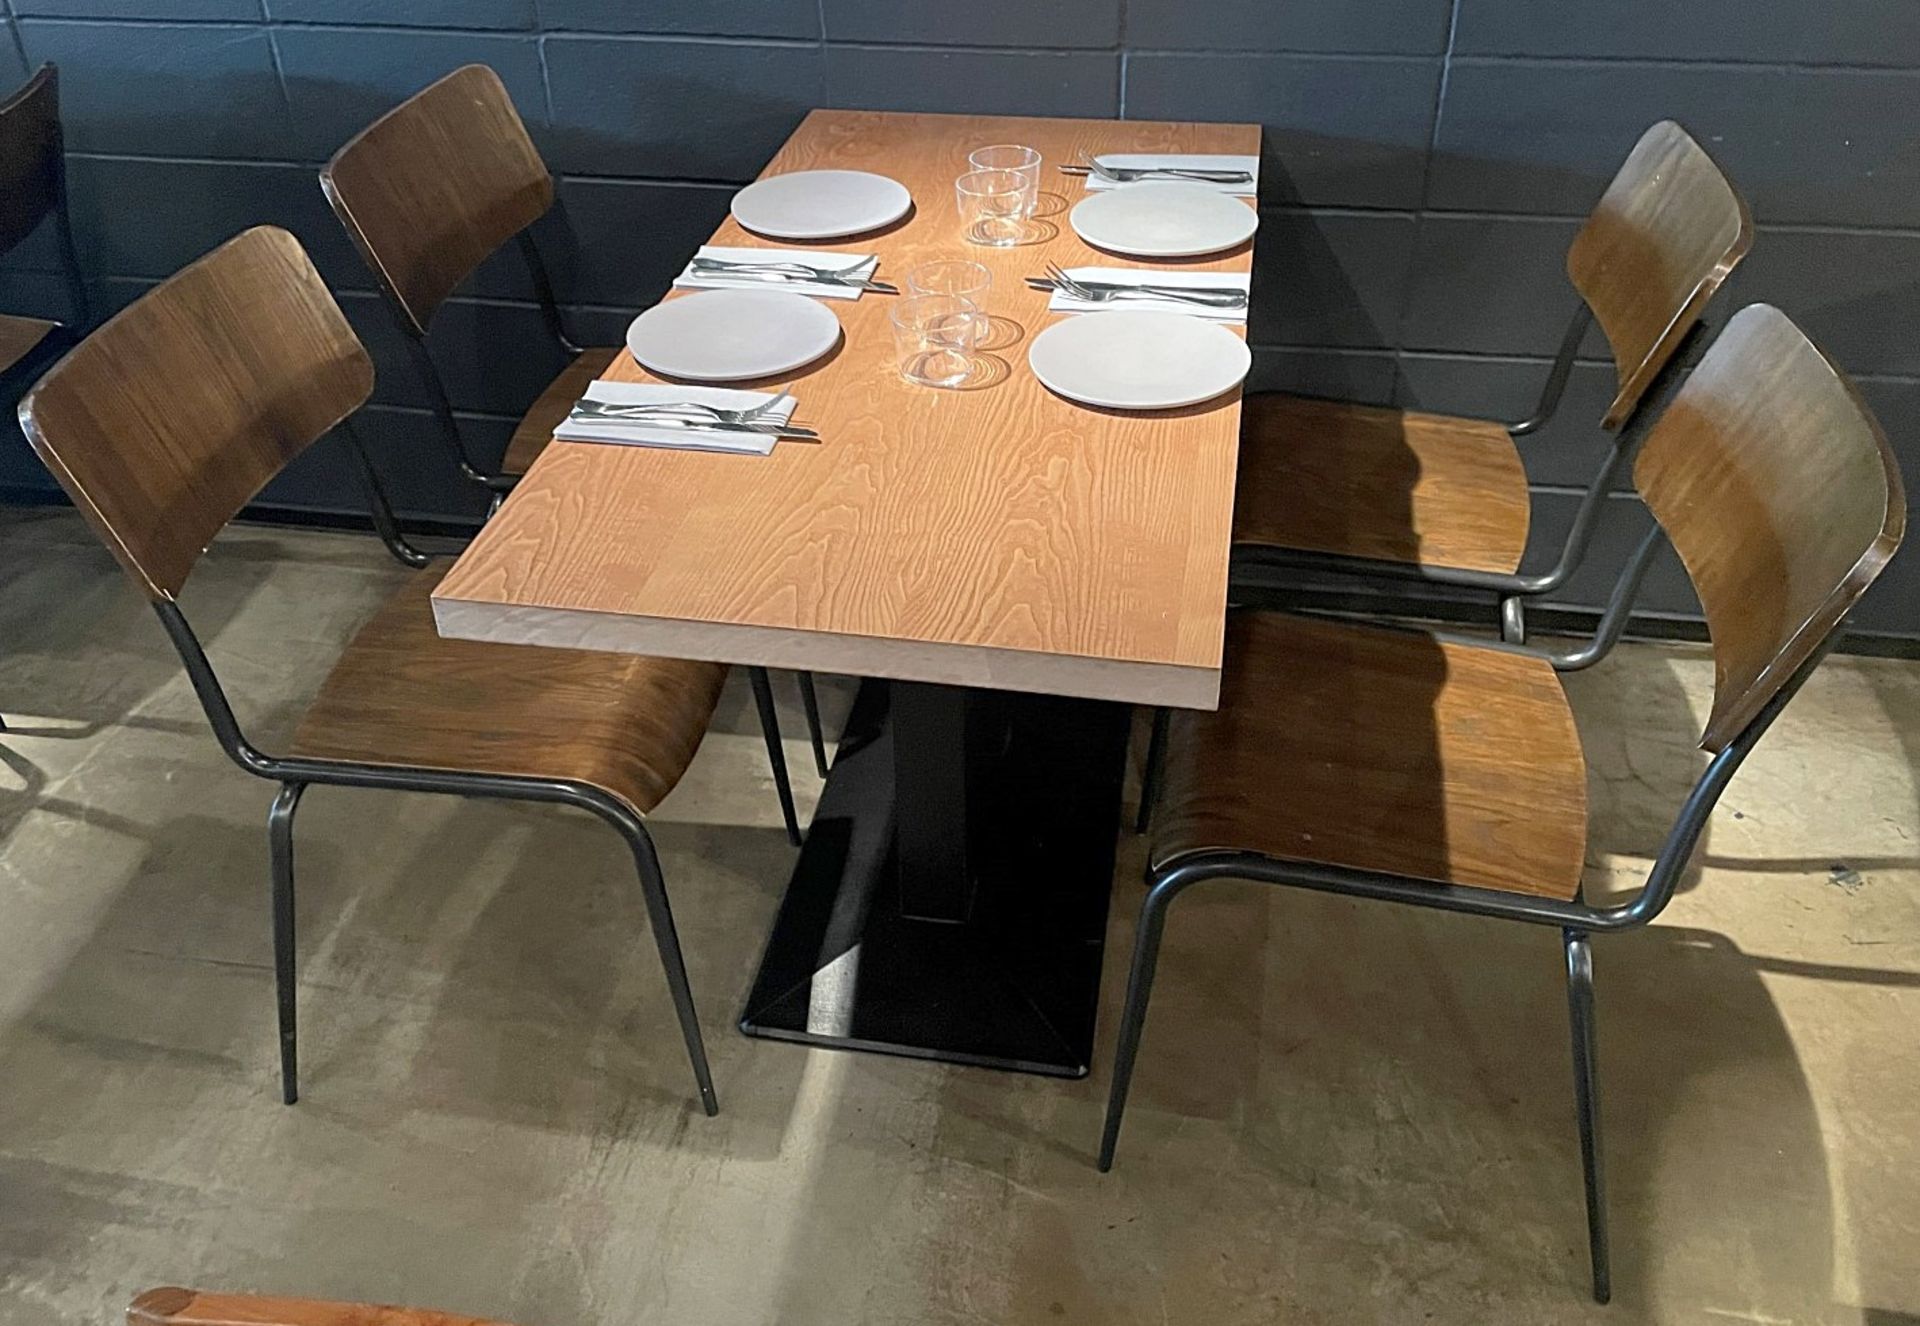 15 x Bistro Dining Chairs Featuring Wooden Back And Seats With Sturdy Metal Frames - Ref: MAN142 -